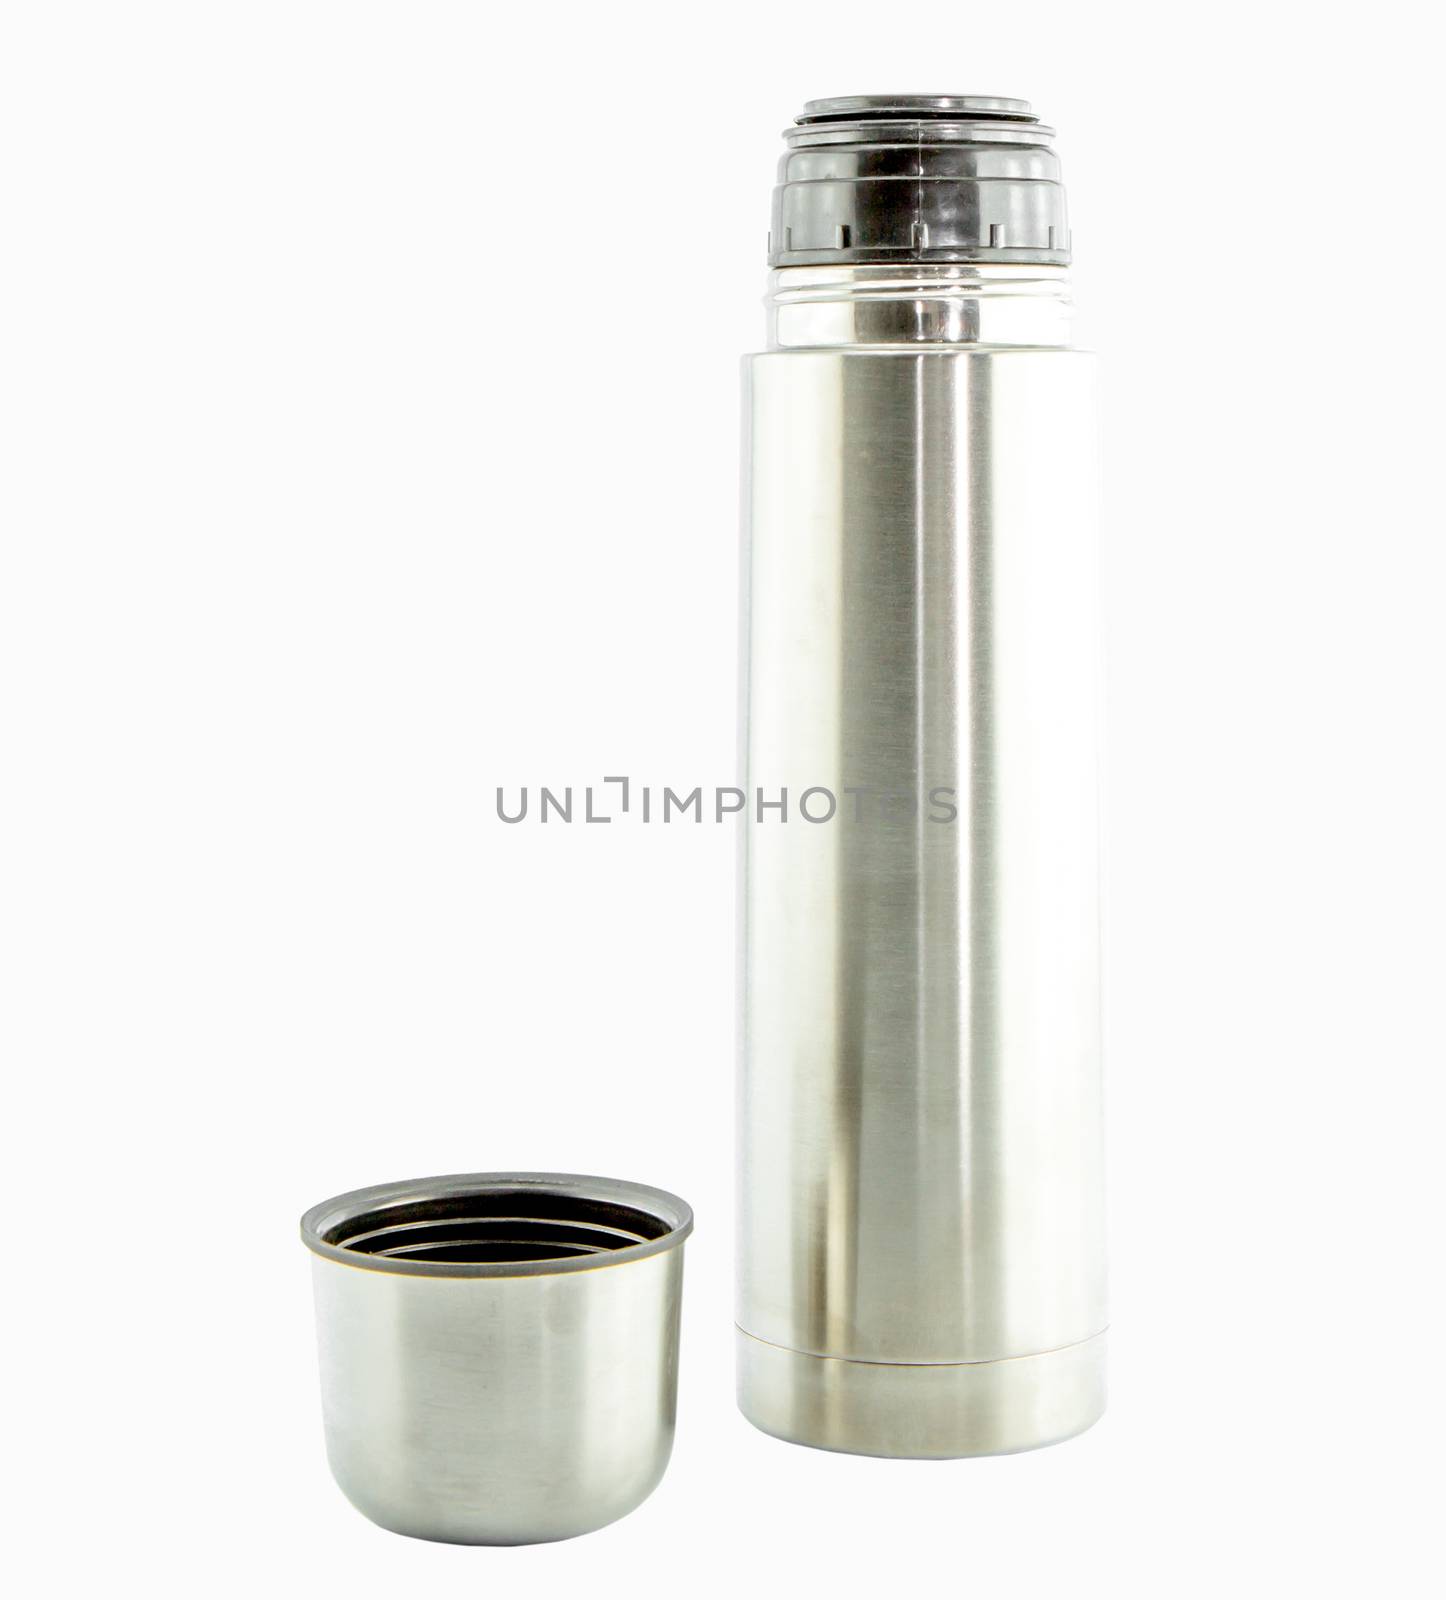 Metal Thermo flask isolate on white background by bunwit